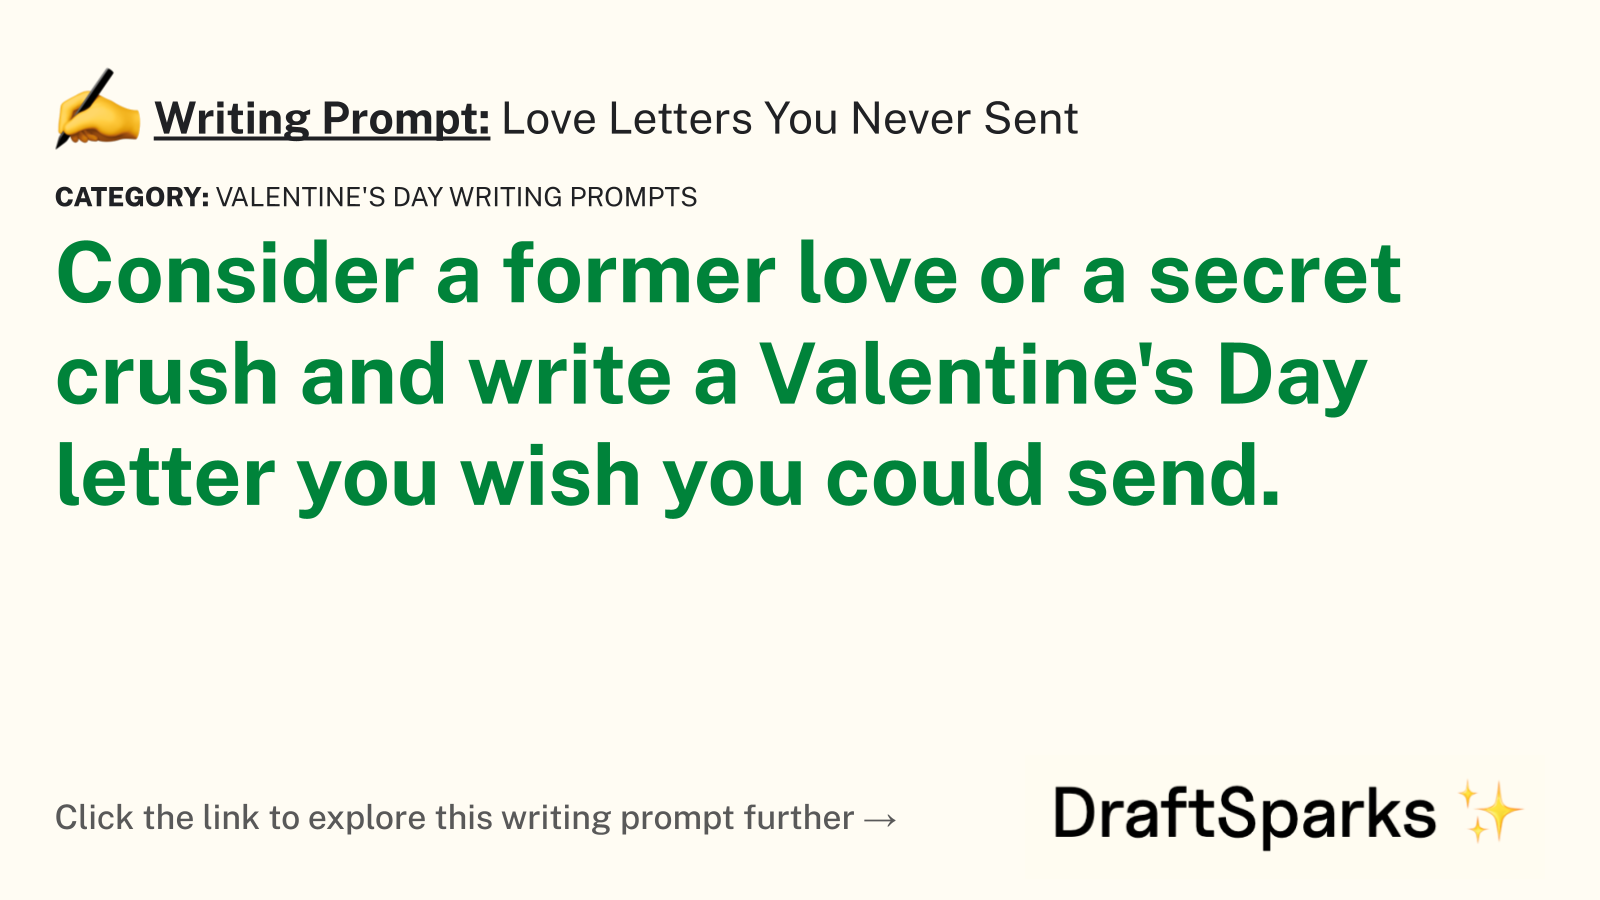 Love Letters You Never Sent